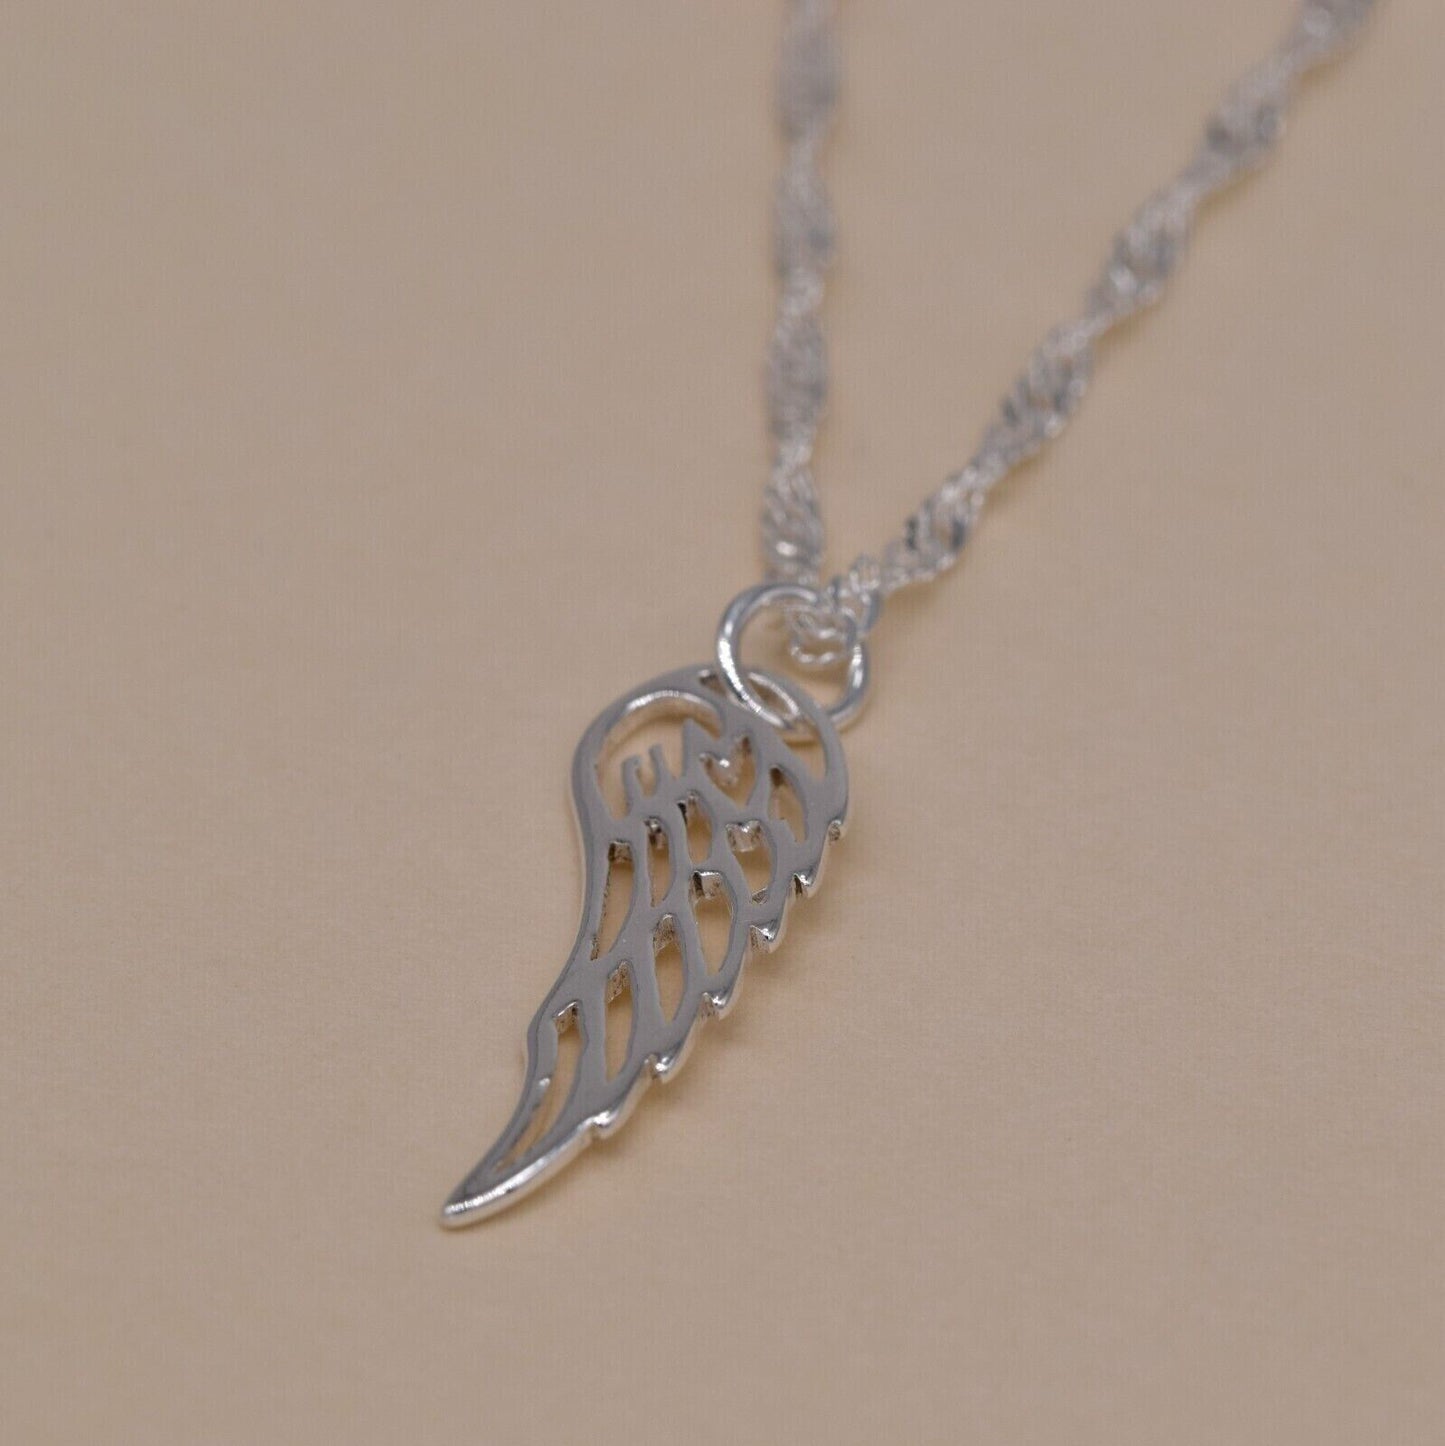 Genuine 925 Sterling Silver Wing Pendant Necklace on Singapore Chain